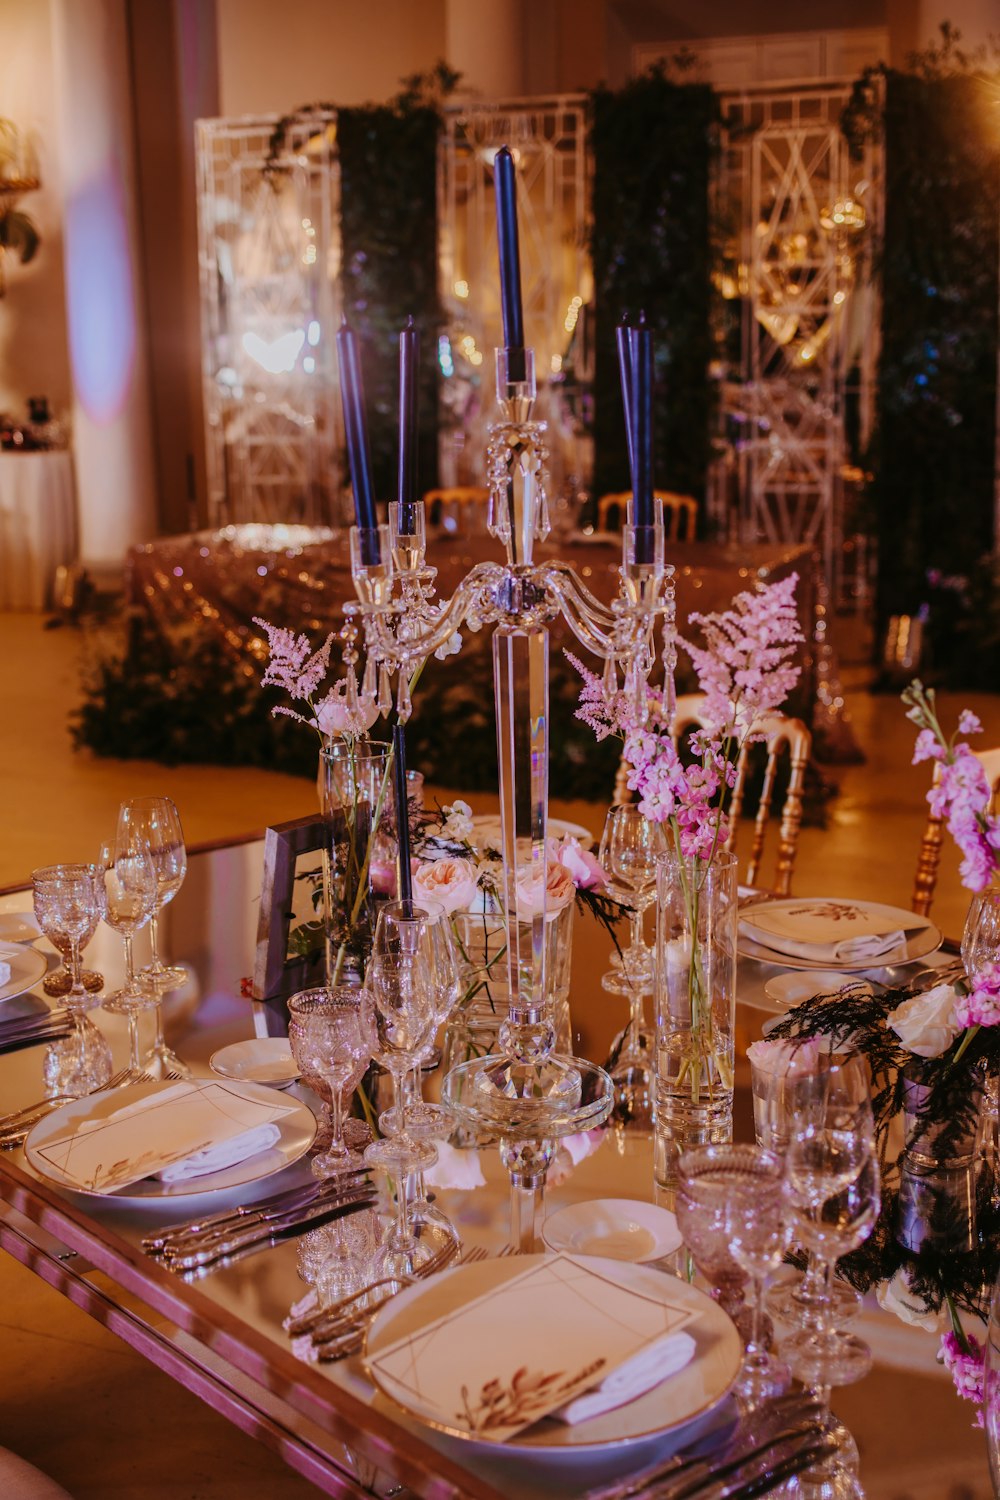 a table set for a formal dinner with flowers and candles